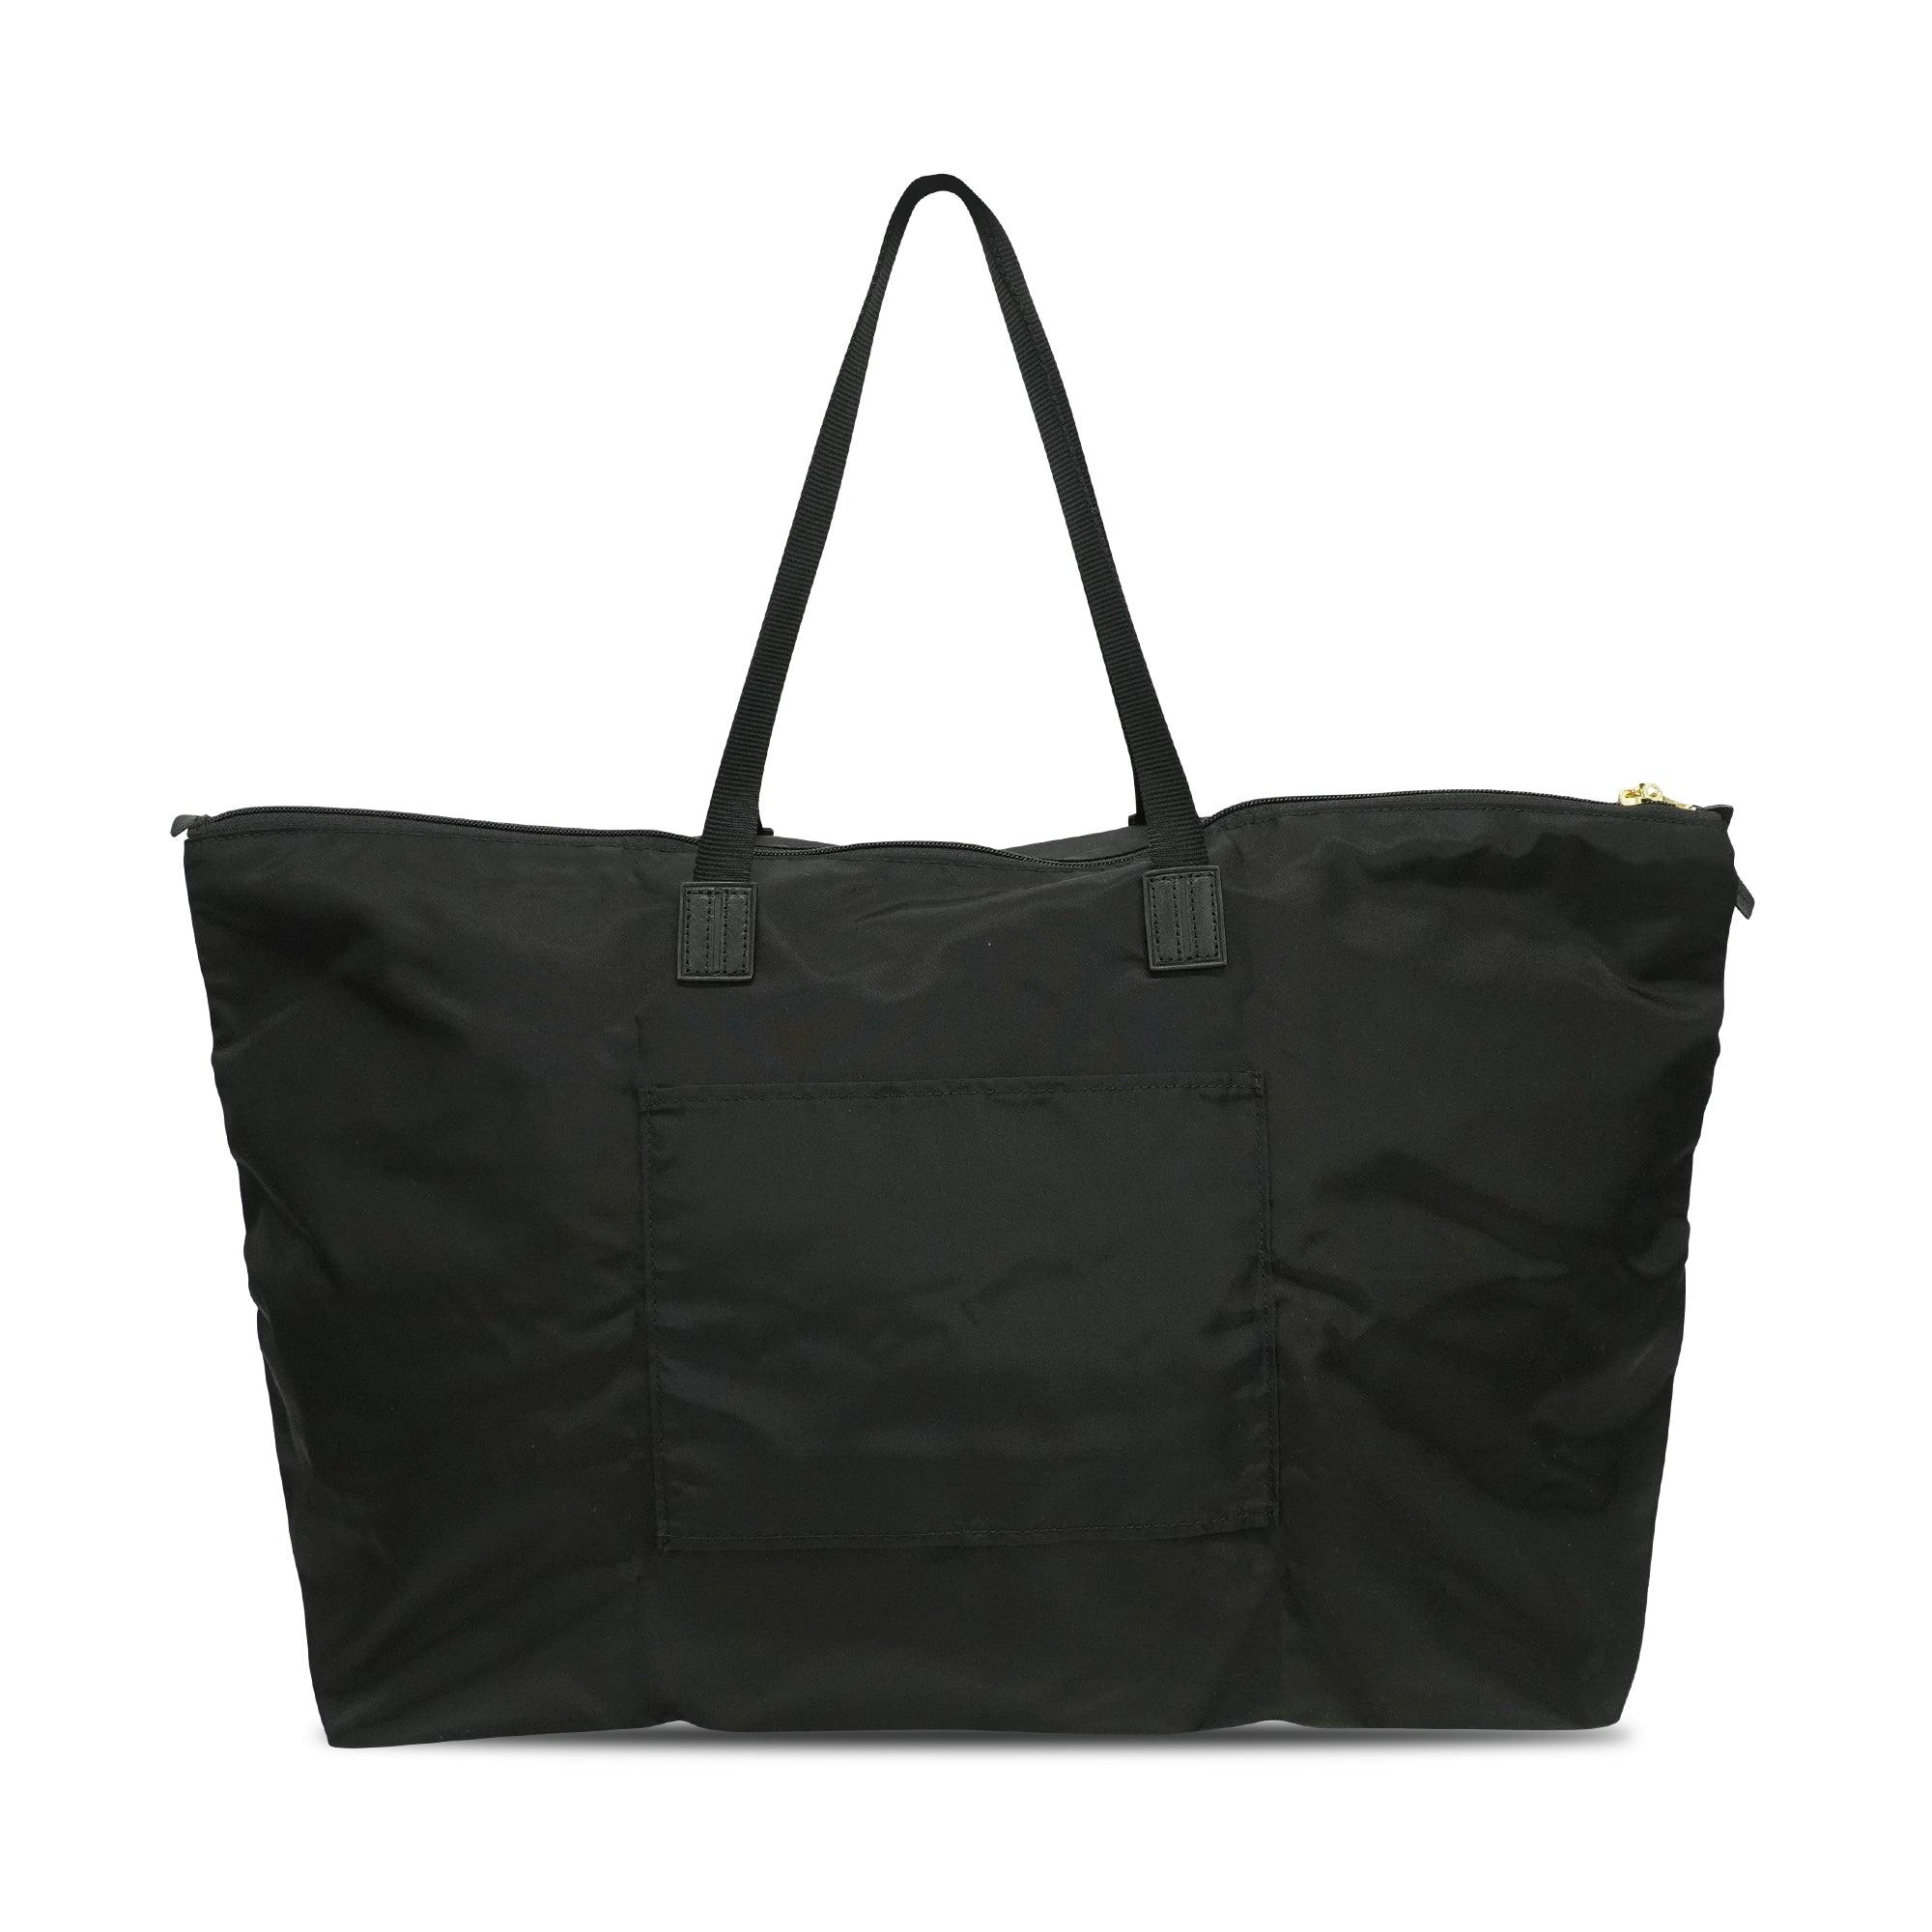 Tumi Tote Bag - Fashionably Yours